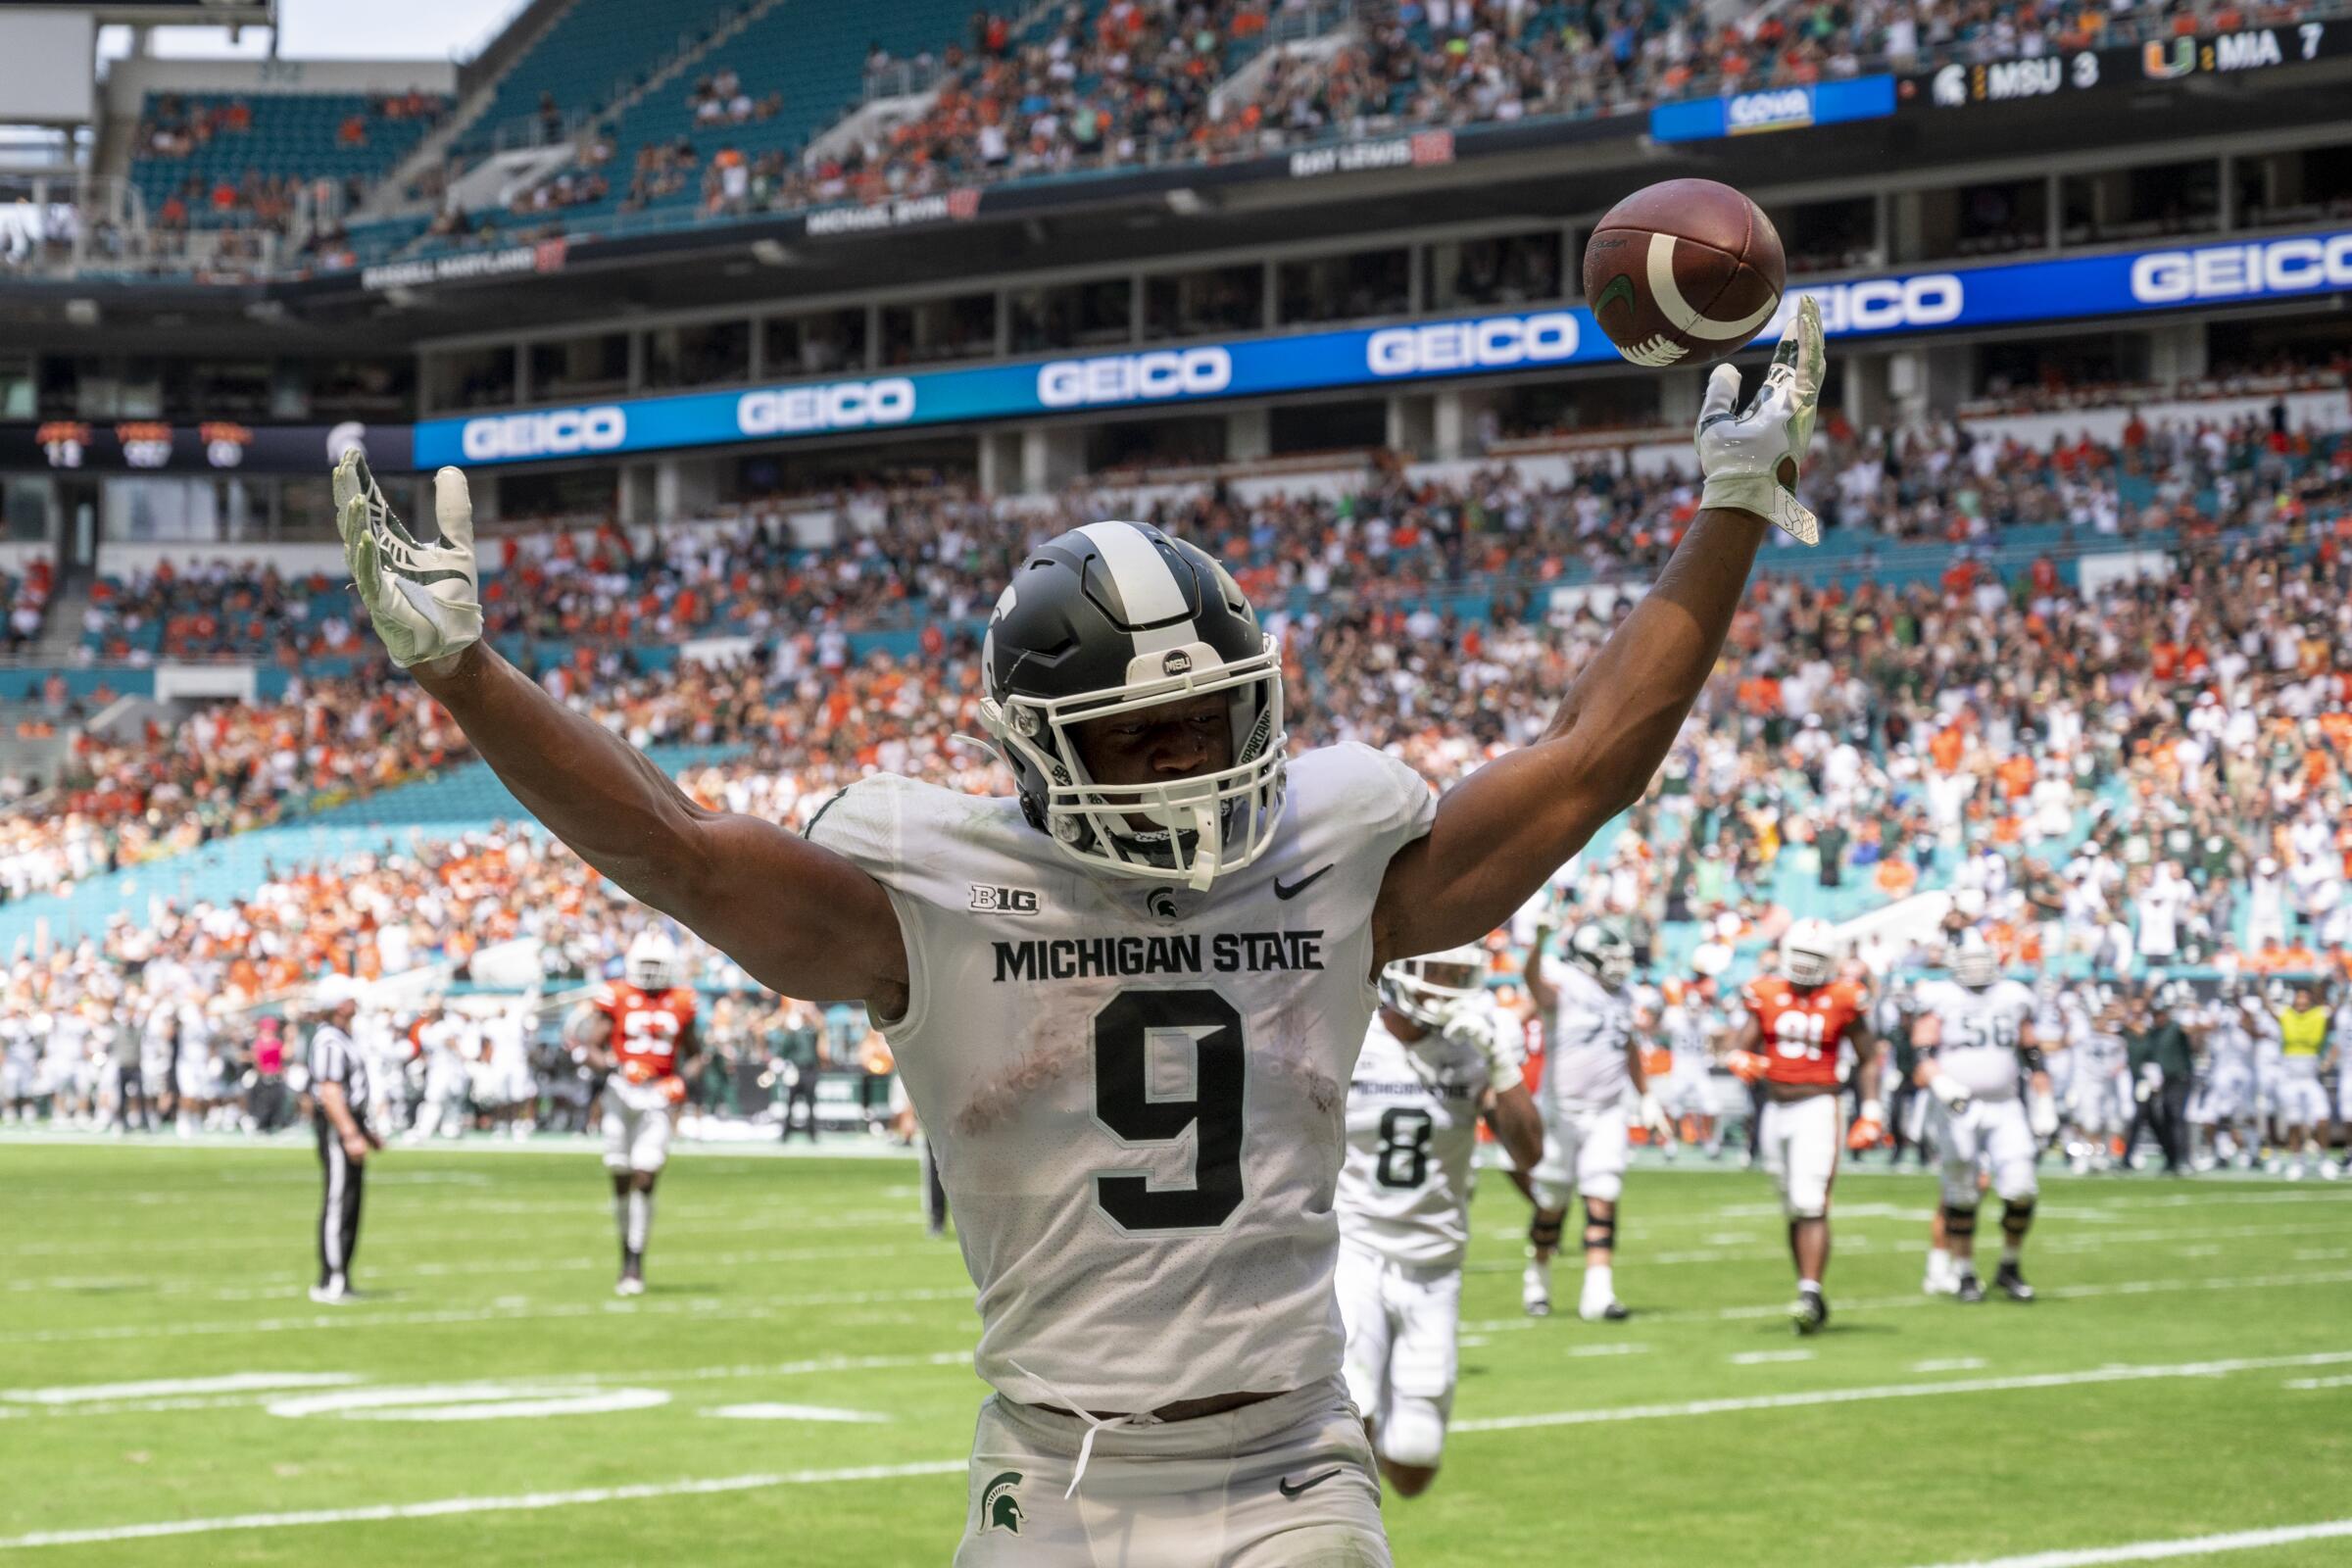 Michigan State running back Kenneth Walker III celebrates after scoring a touchdown against Miami on Sept 18.